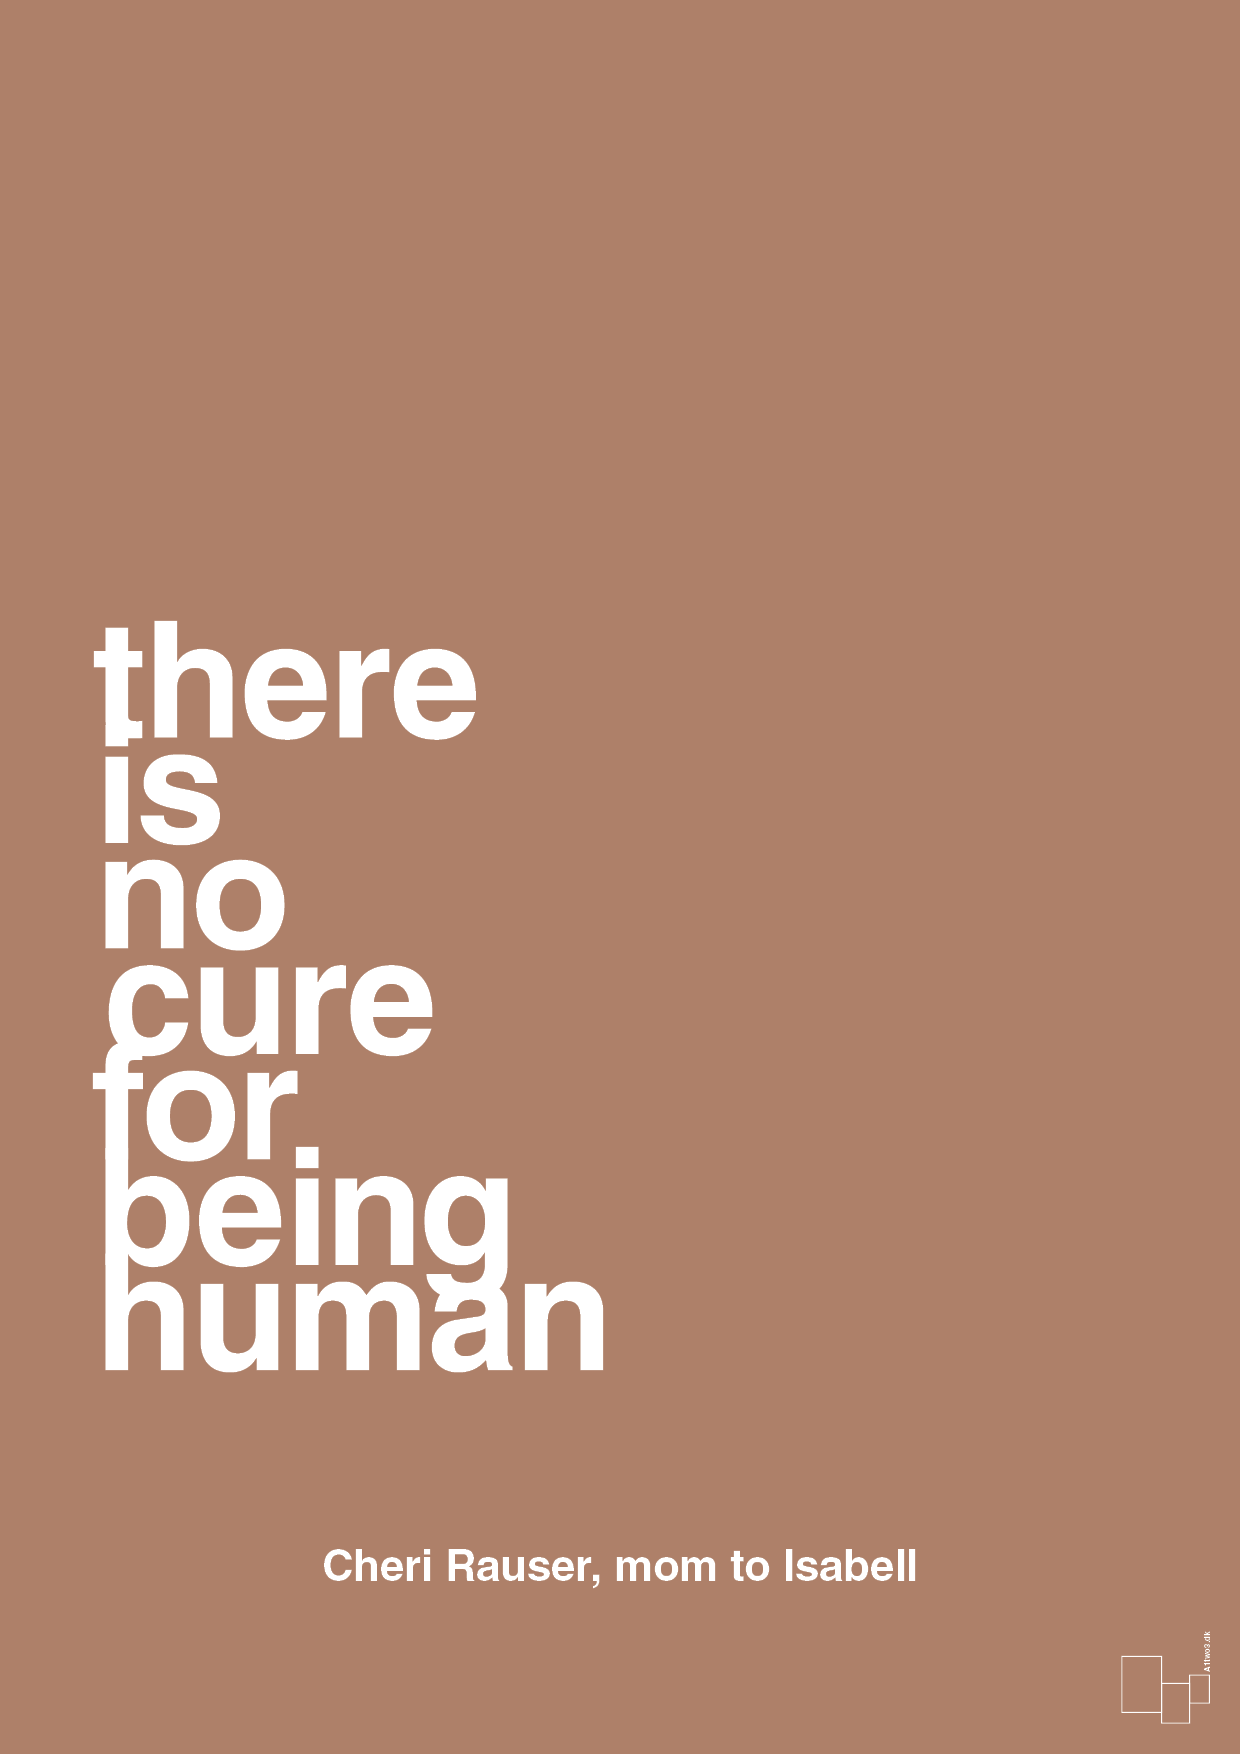 there is no cure for being human - Plakat med Samfund i Cider Spice